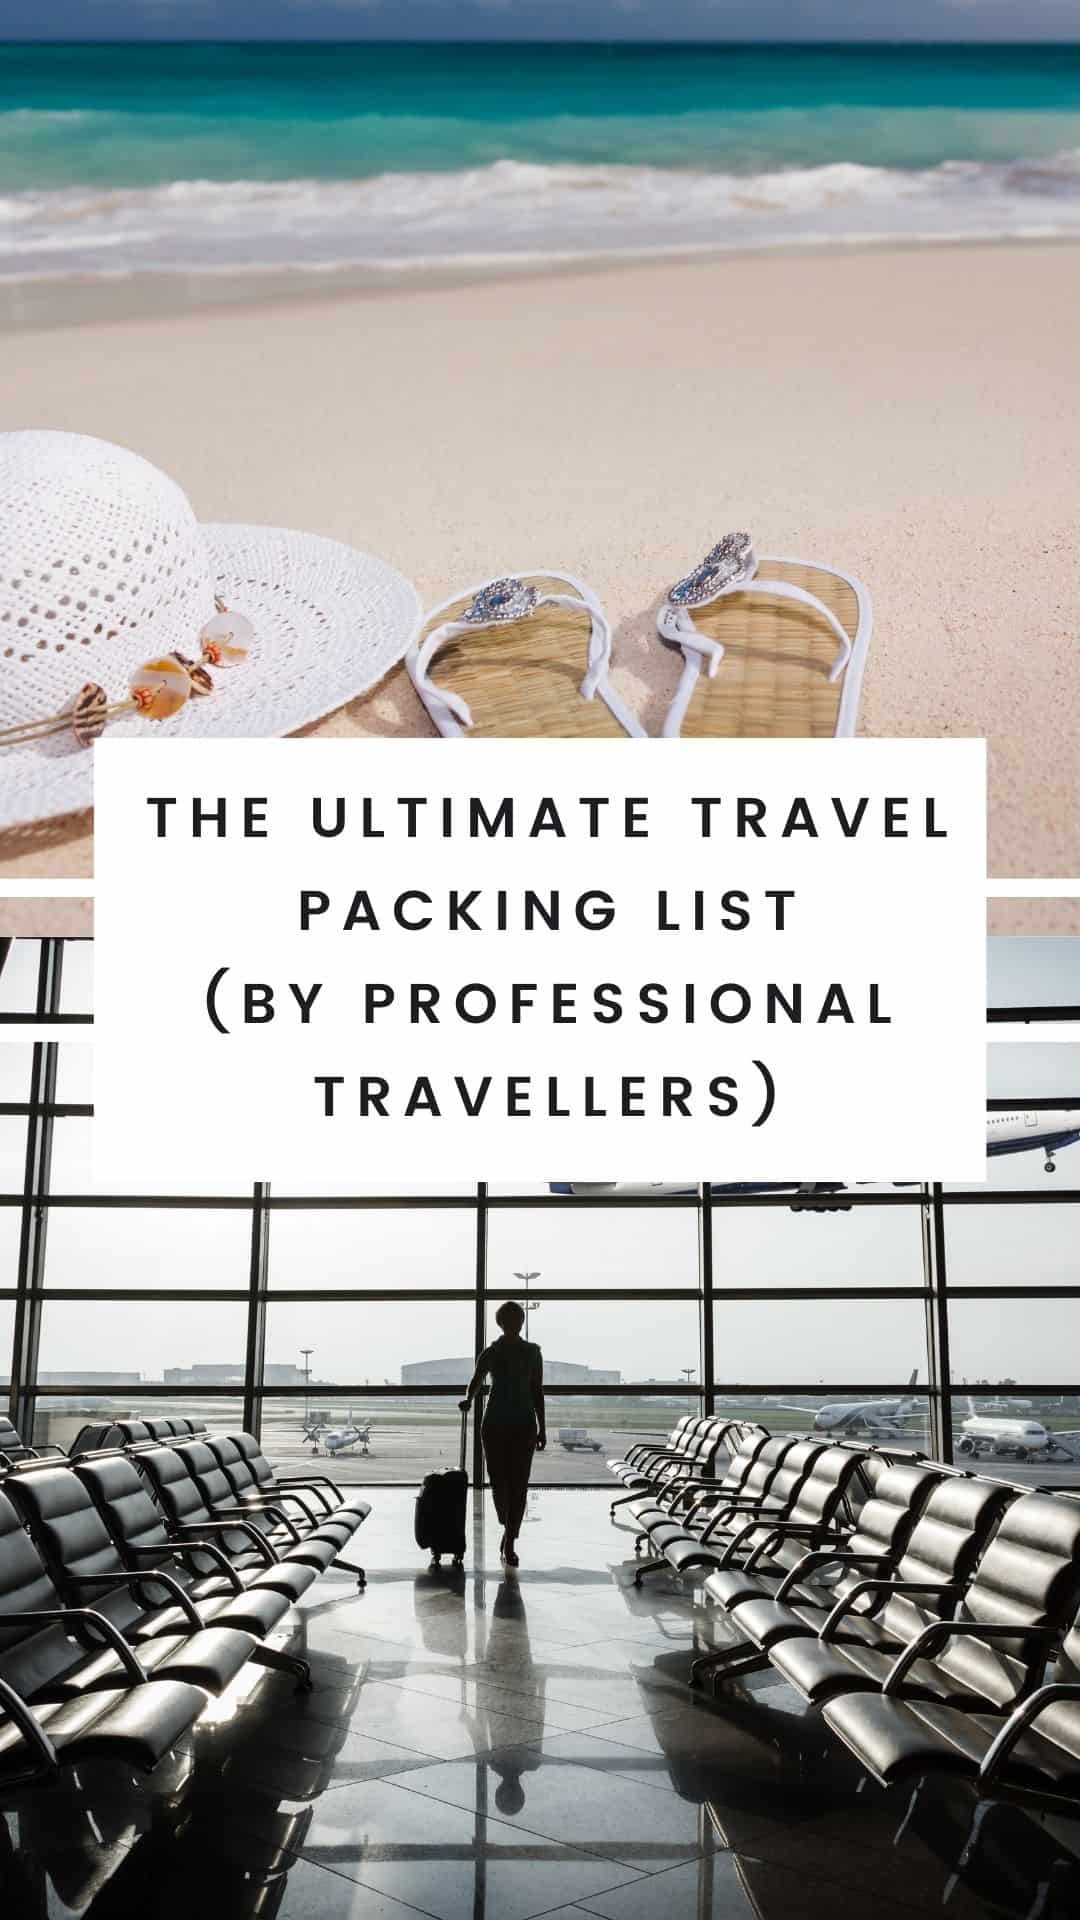 The Ultimate Travel Packing List